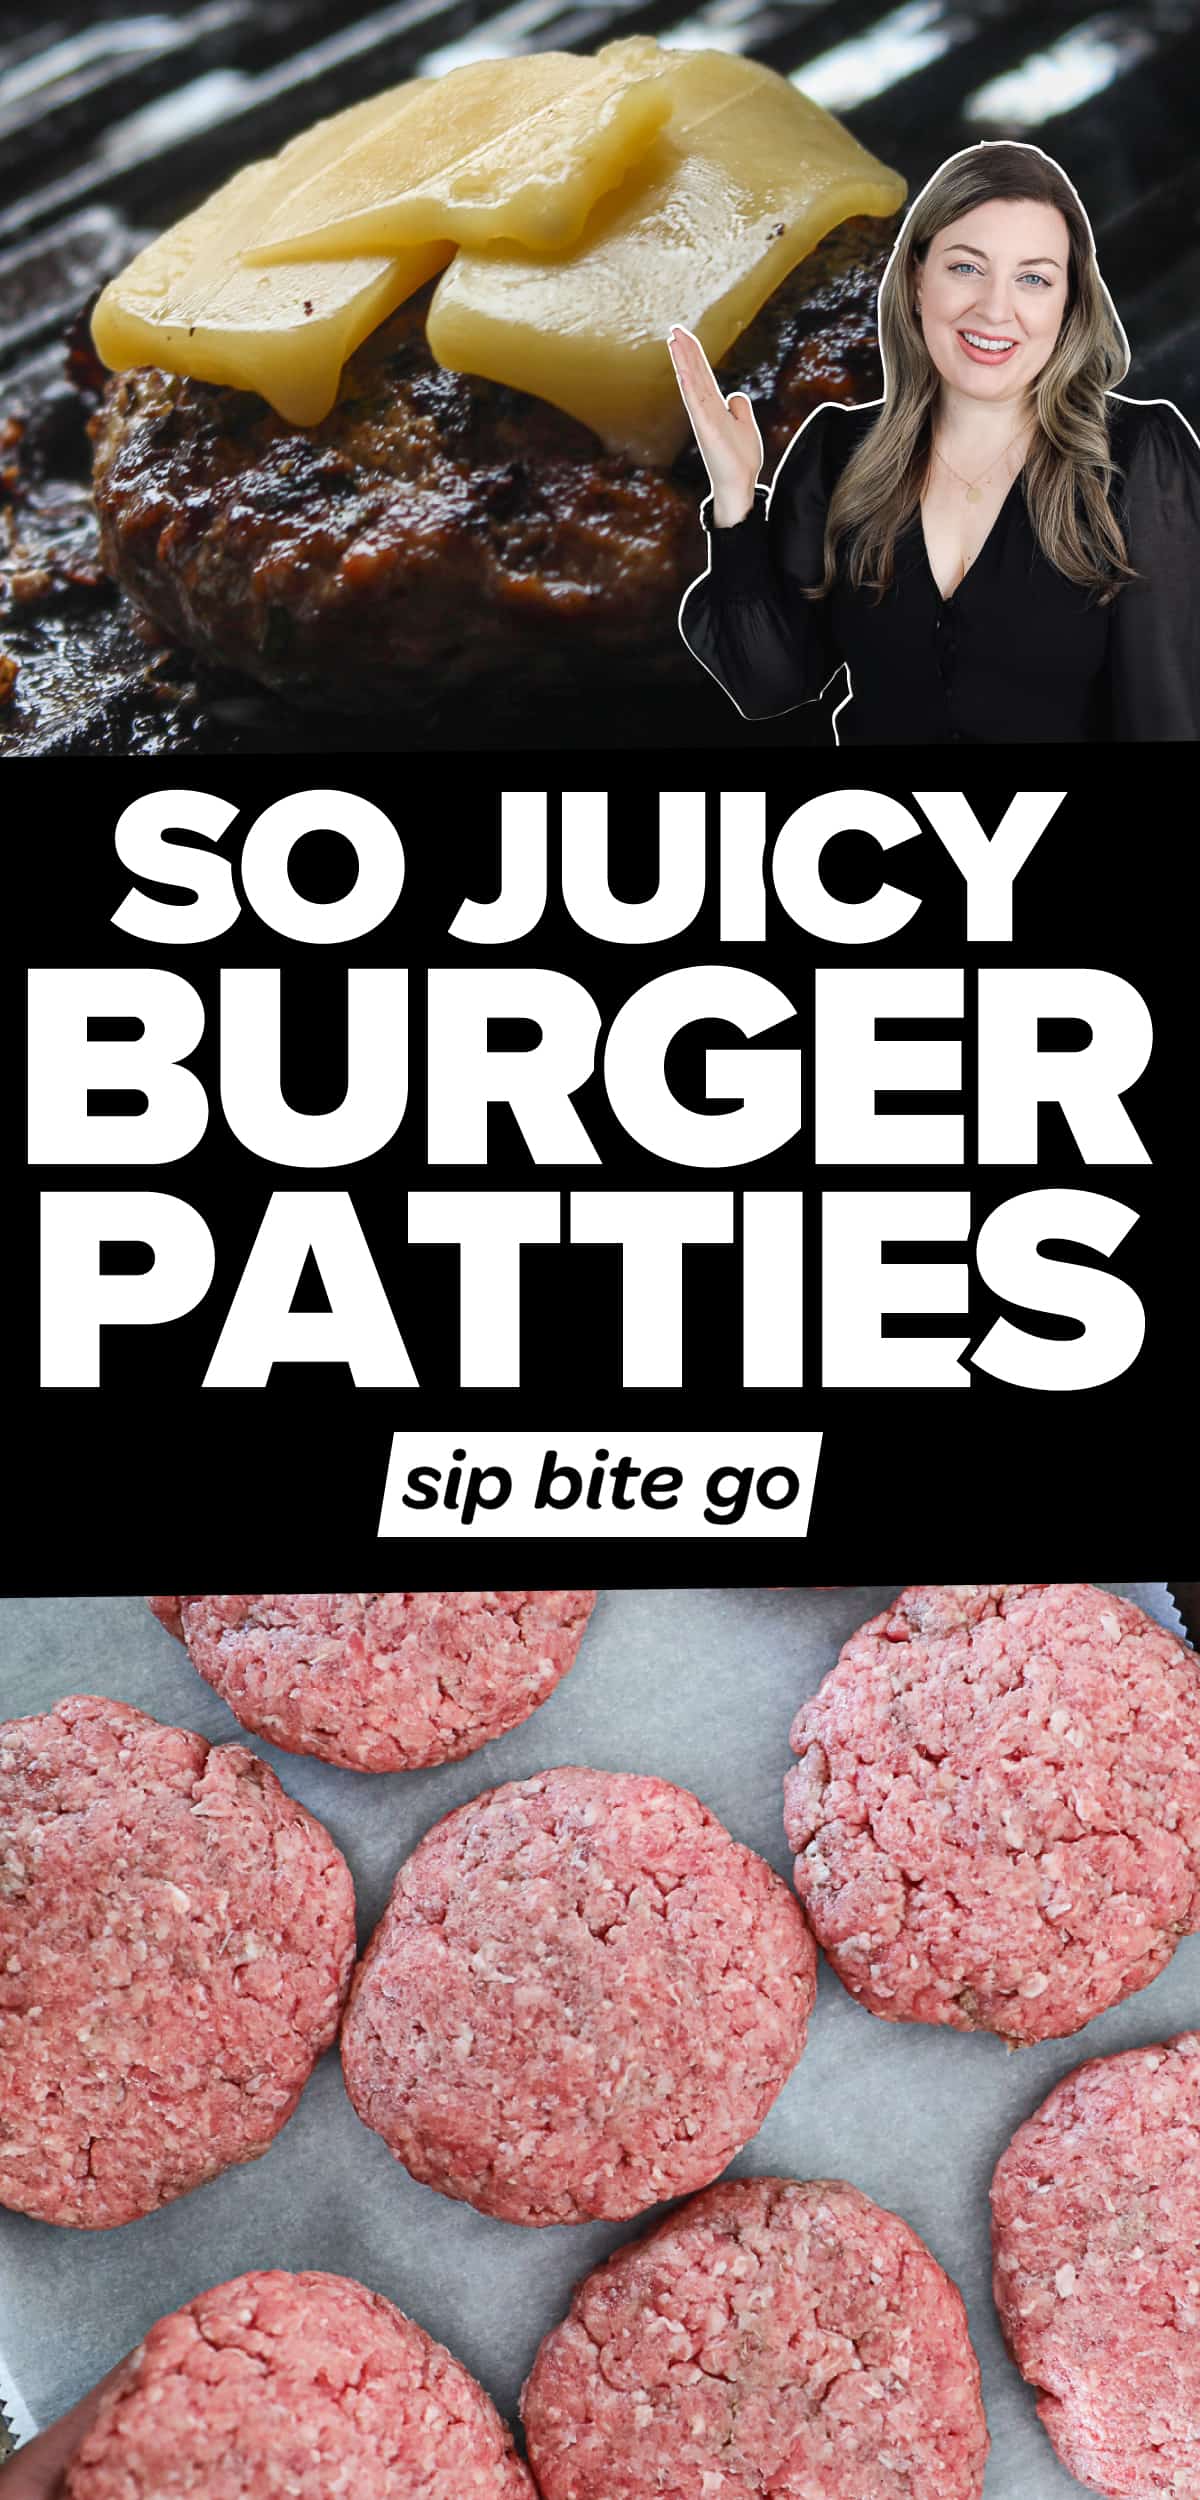 Ground beef patties and hamburger meat images with text overlay.